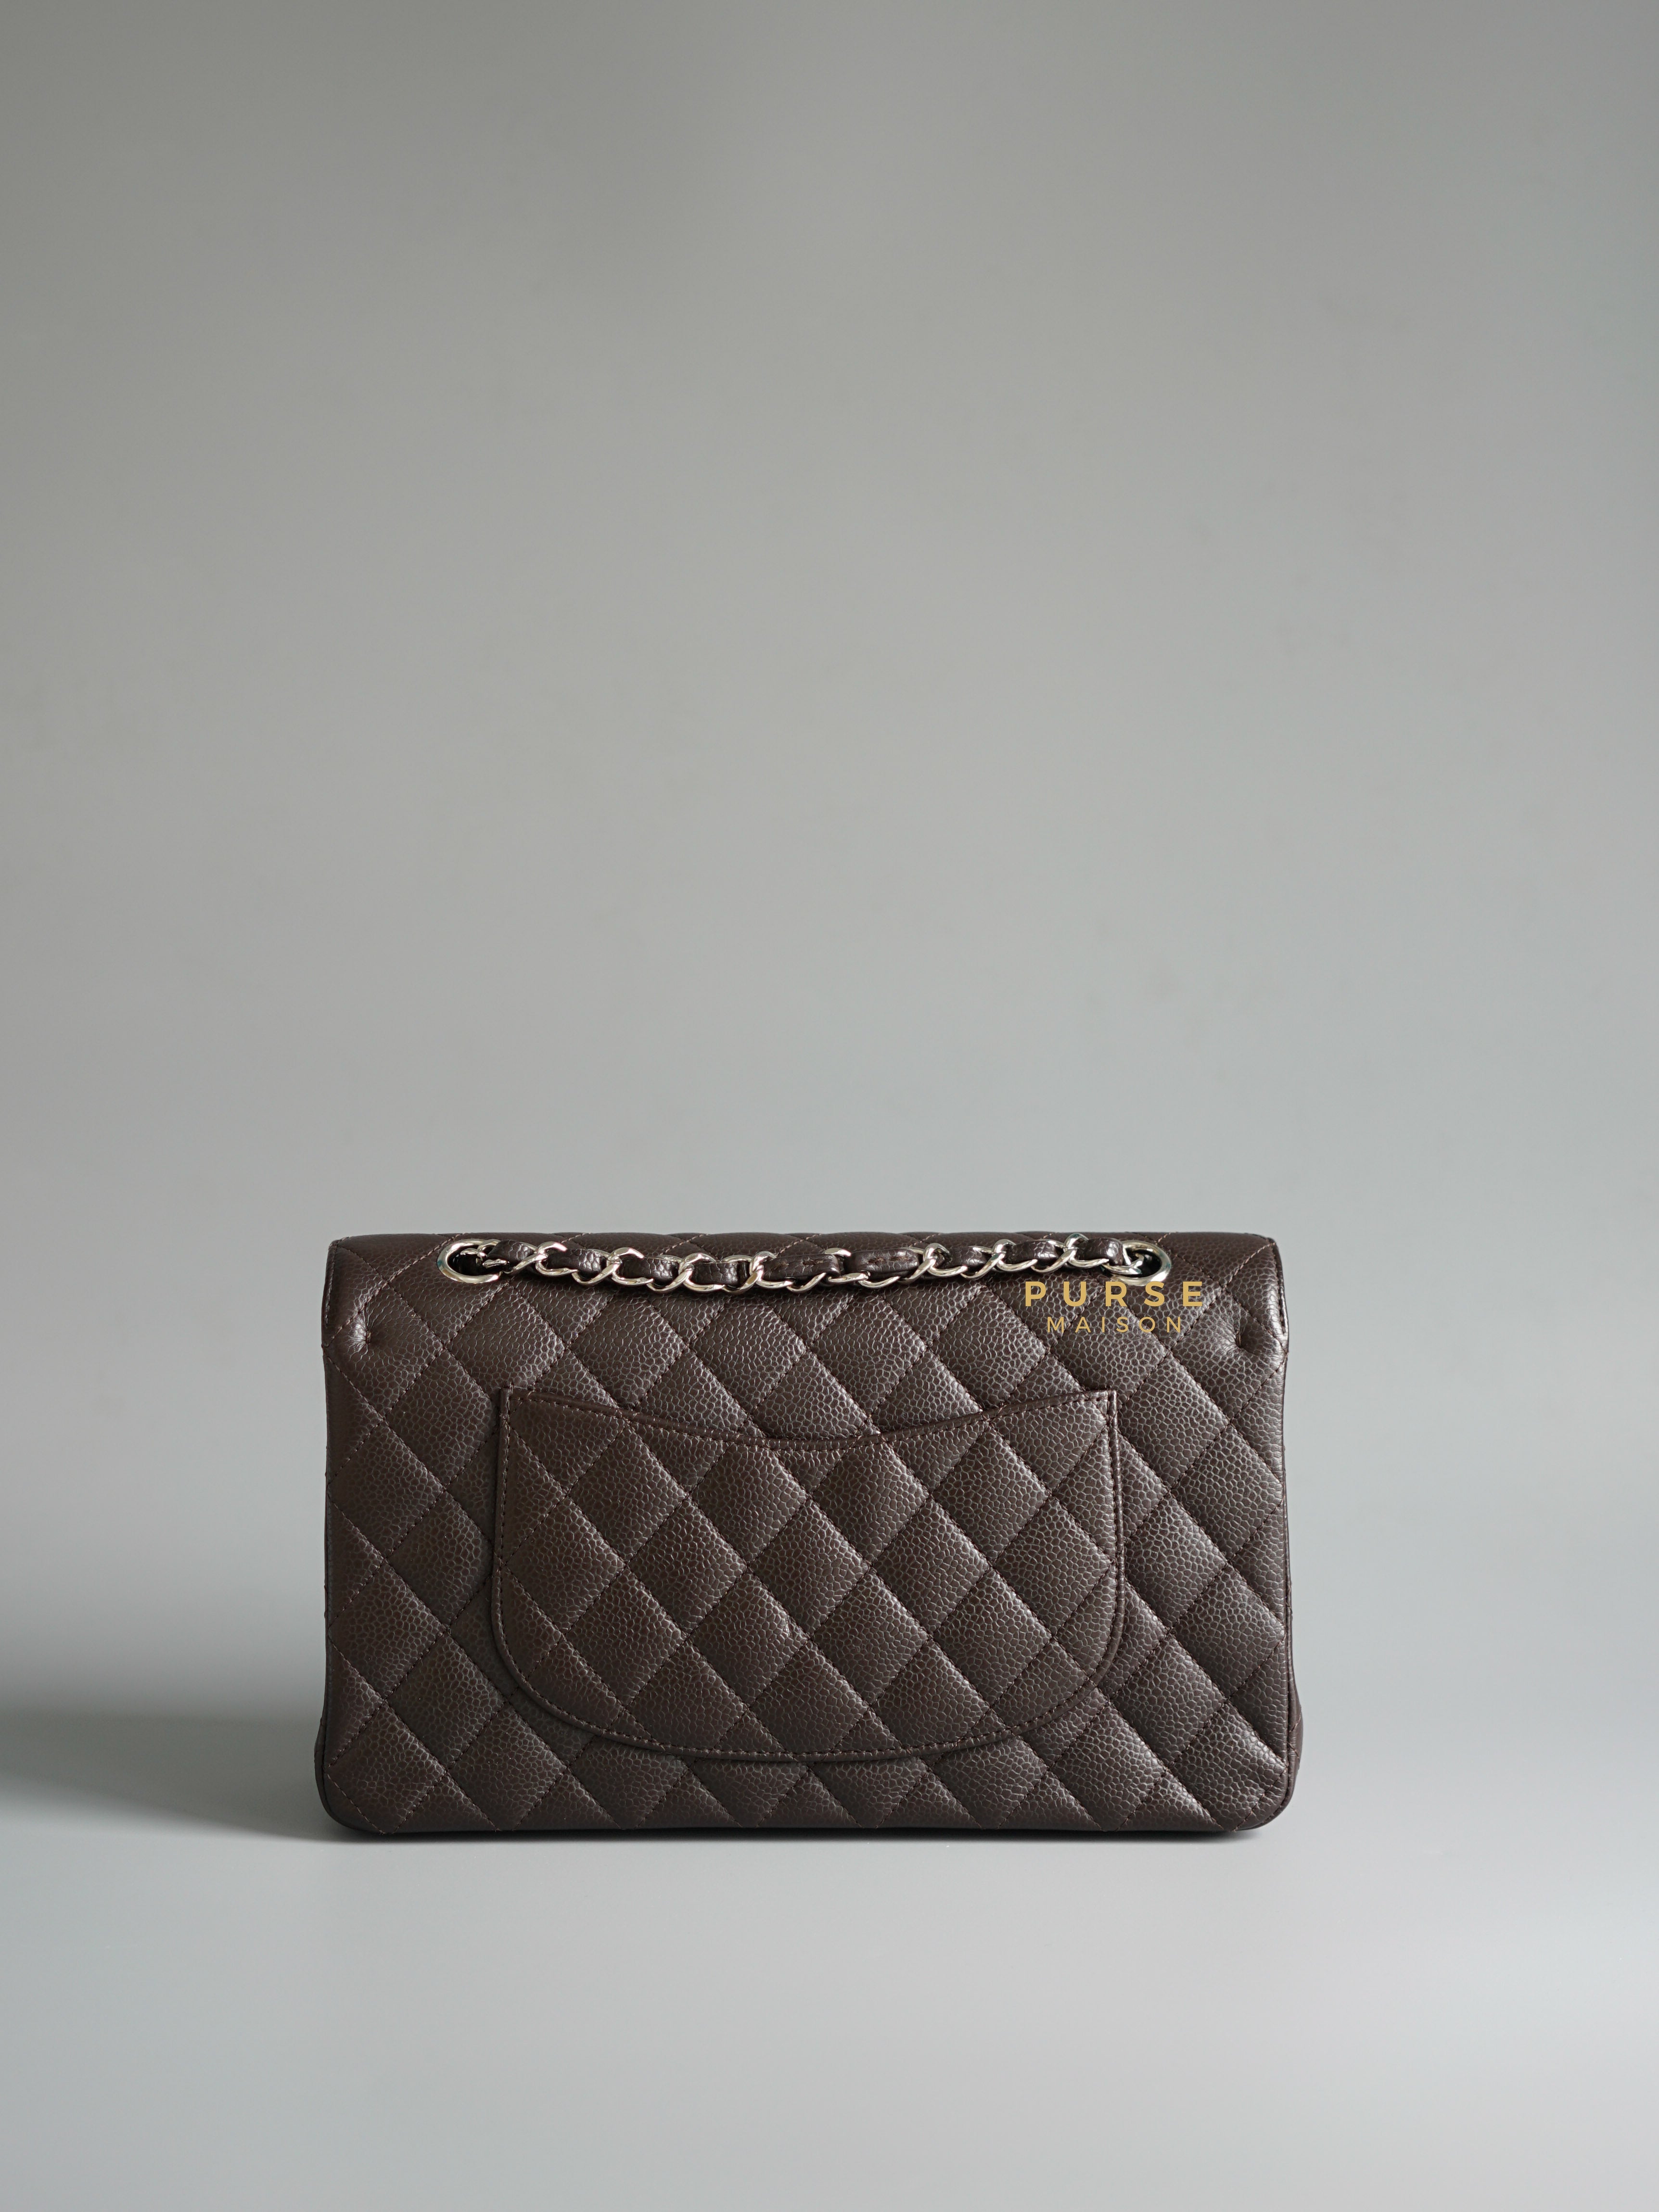 Chanel Classic Double Flap Brown Medium Caviar and Silver Hardware Series 13 | Purse Maison Luxury Bags Shop